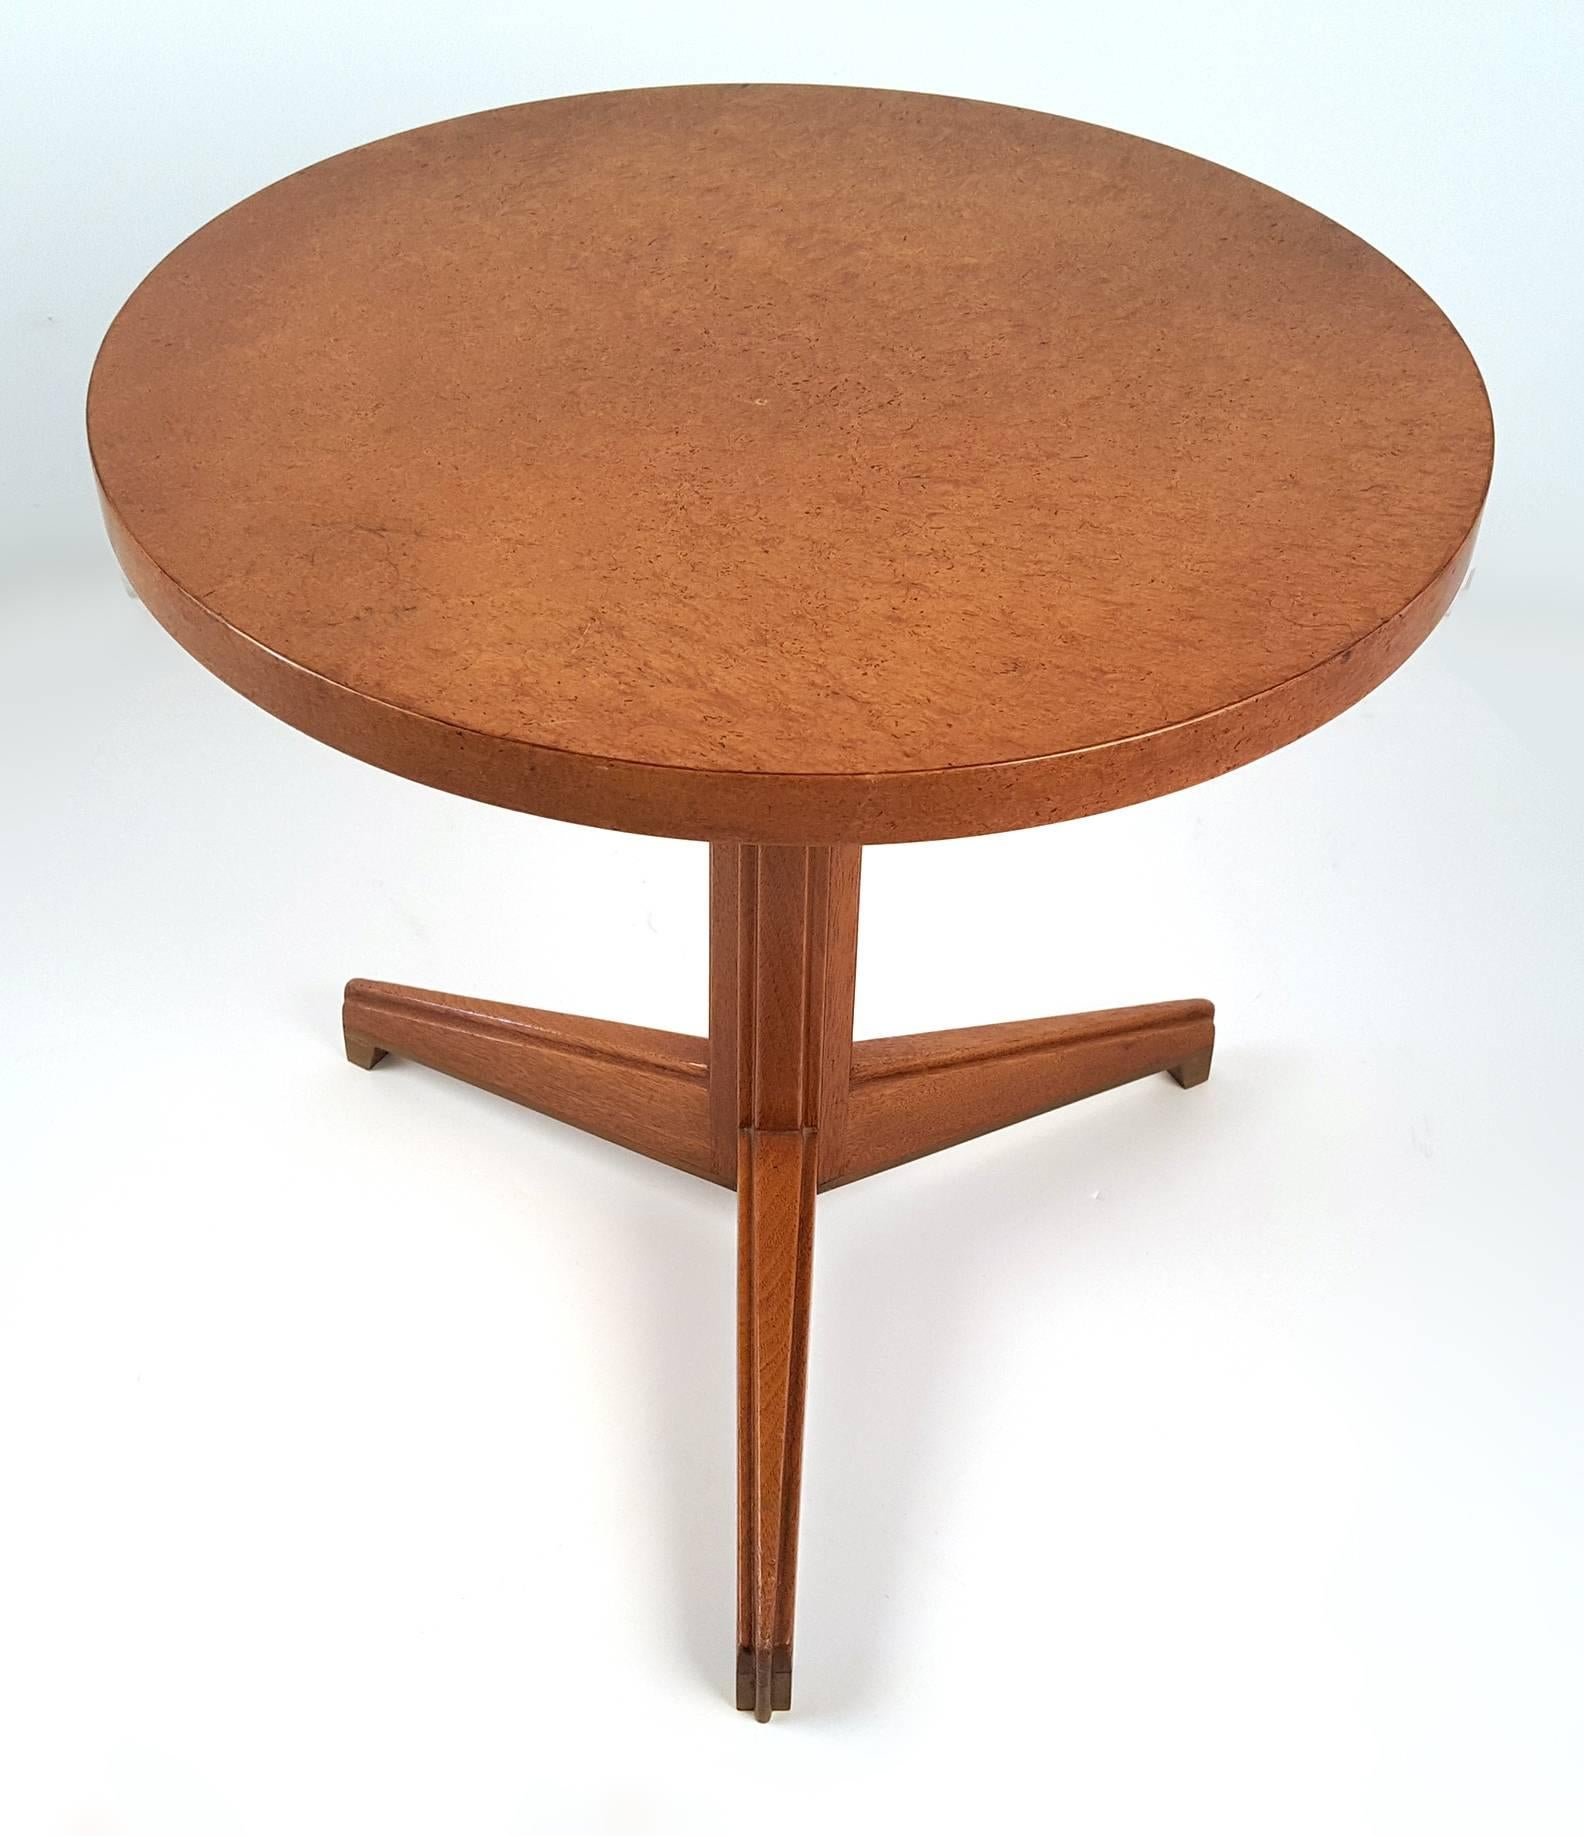 Stunning tripod side table by Edward Wormley for Dunbar from the Famous 'Janus' Collection. Stunning exotic wood top and solid brass feet. Original condition. Retains brass rectangular label.